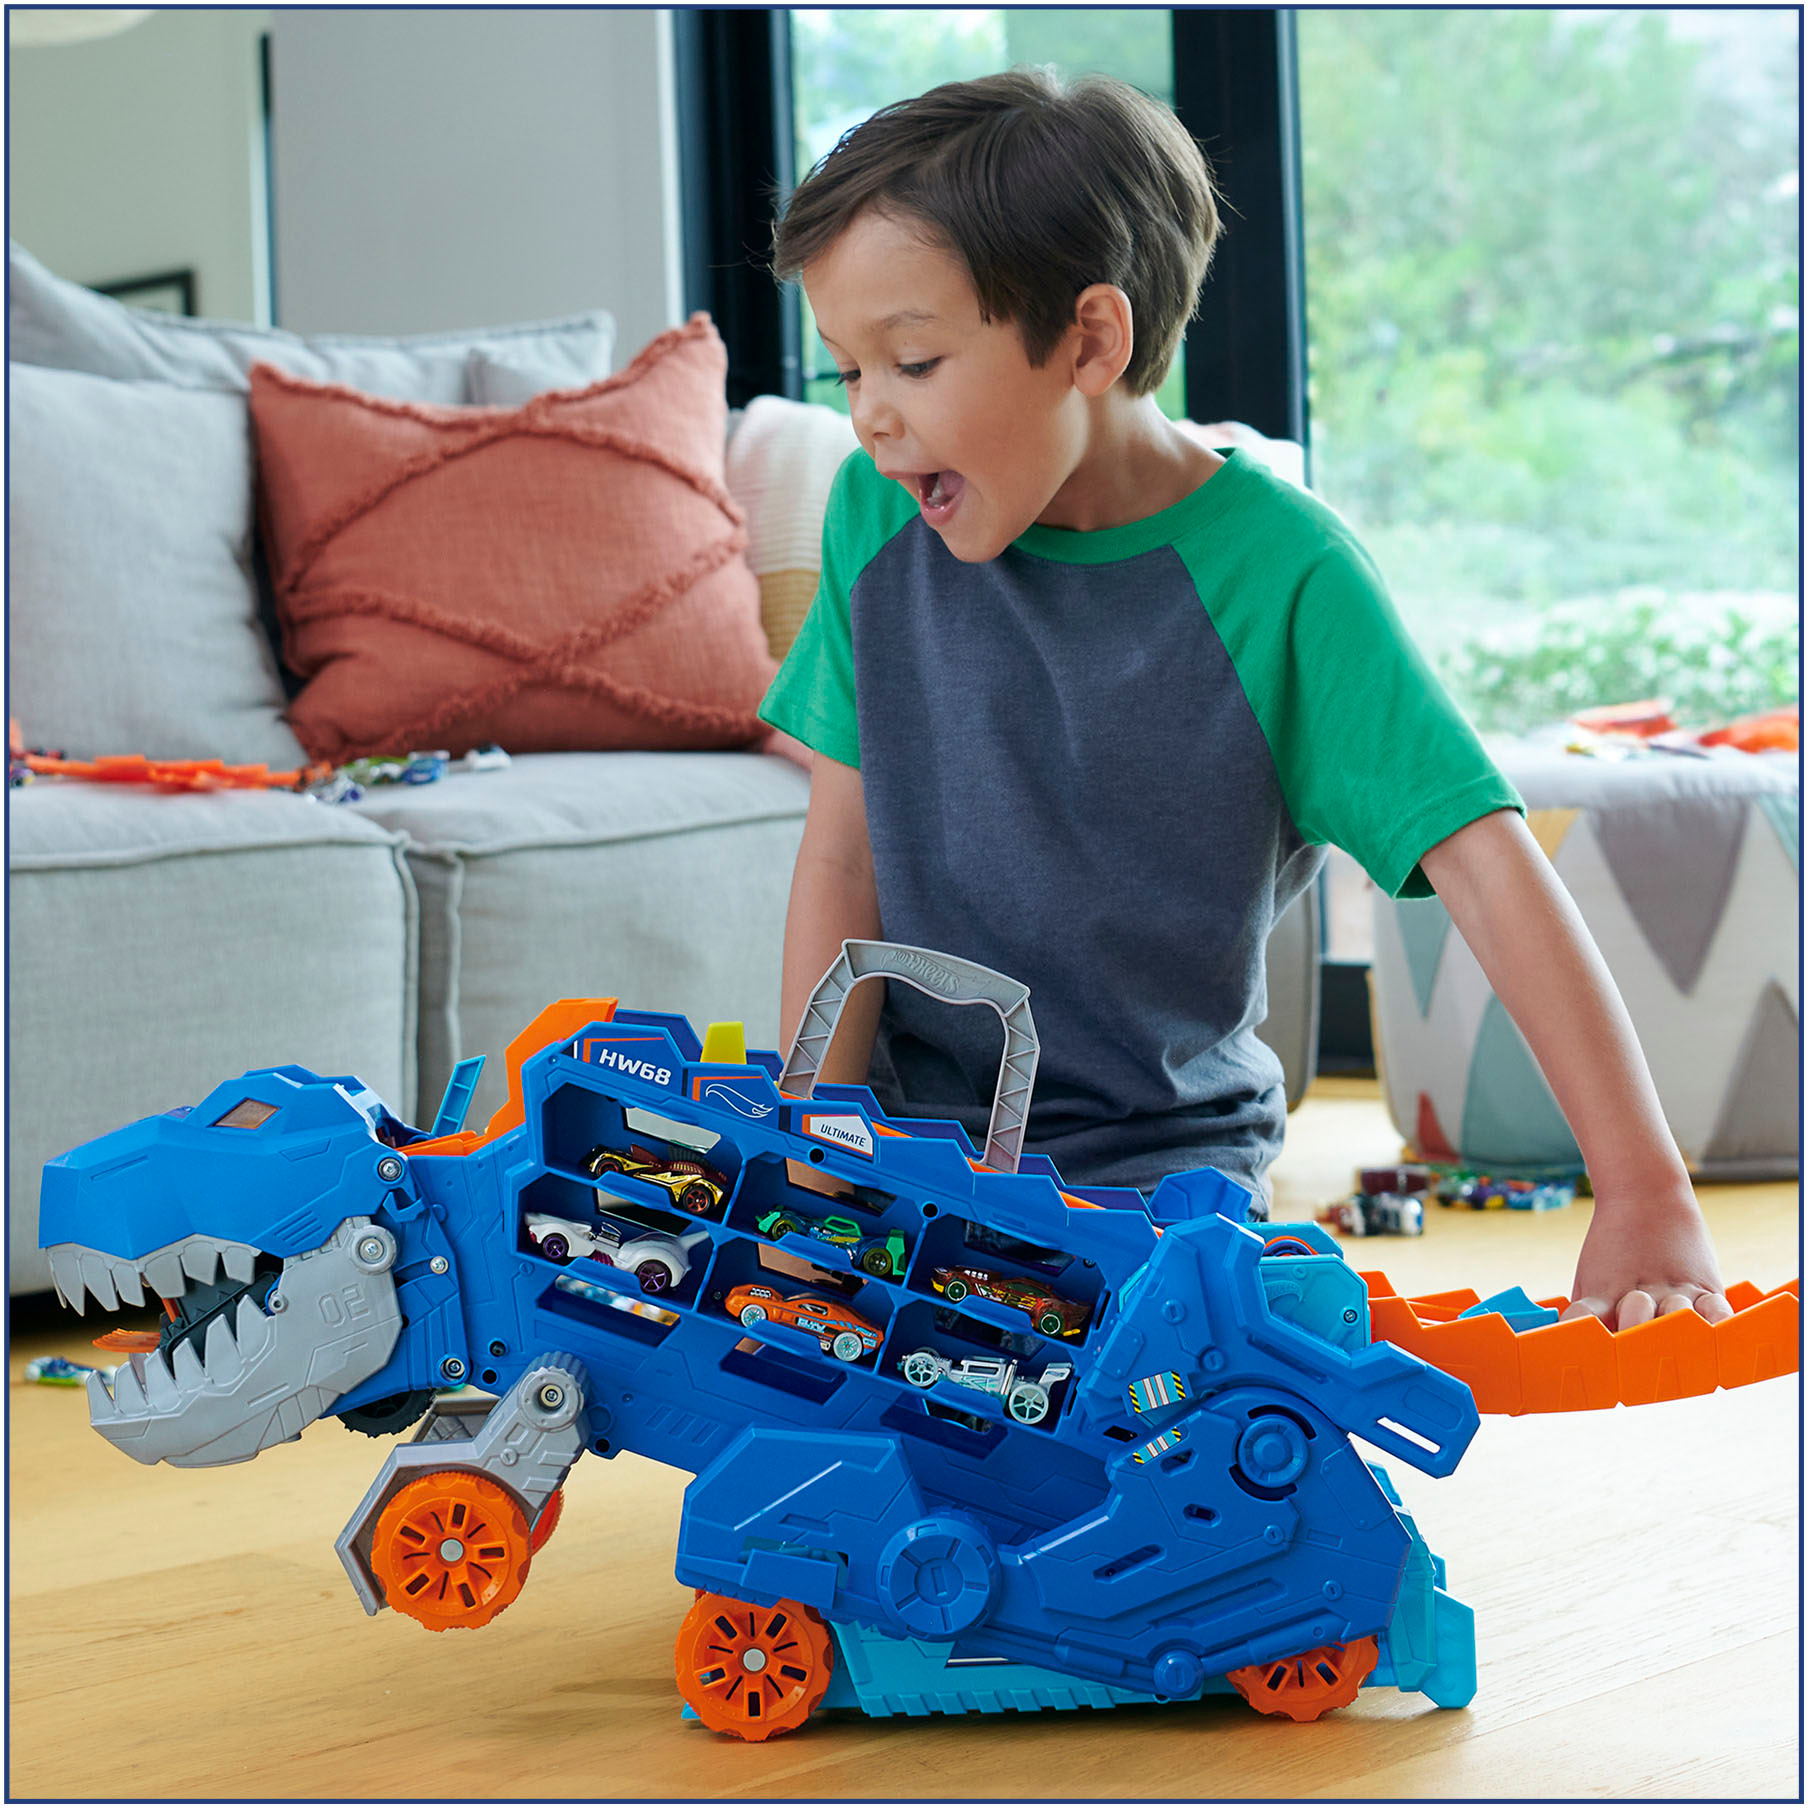 Hot Wheels City Ultimate Hauler, Transforms into a T-Rex with Race Track,  Stores 20+ Cars, 4Y+, Blue 